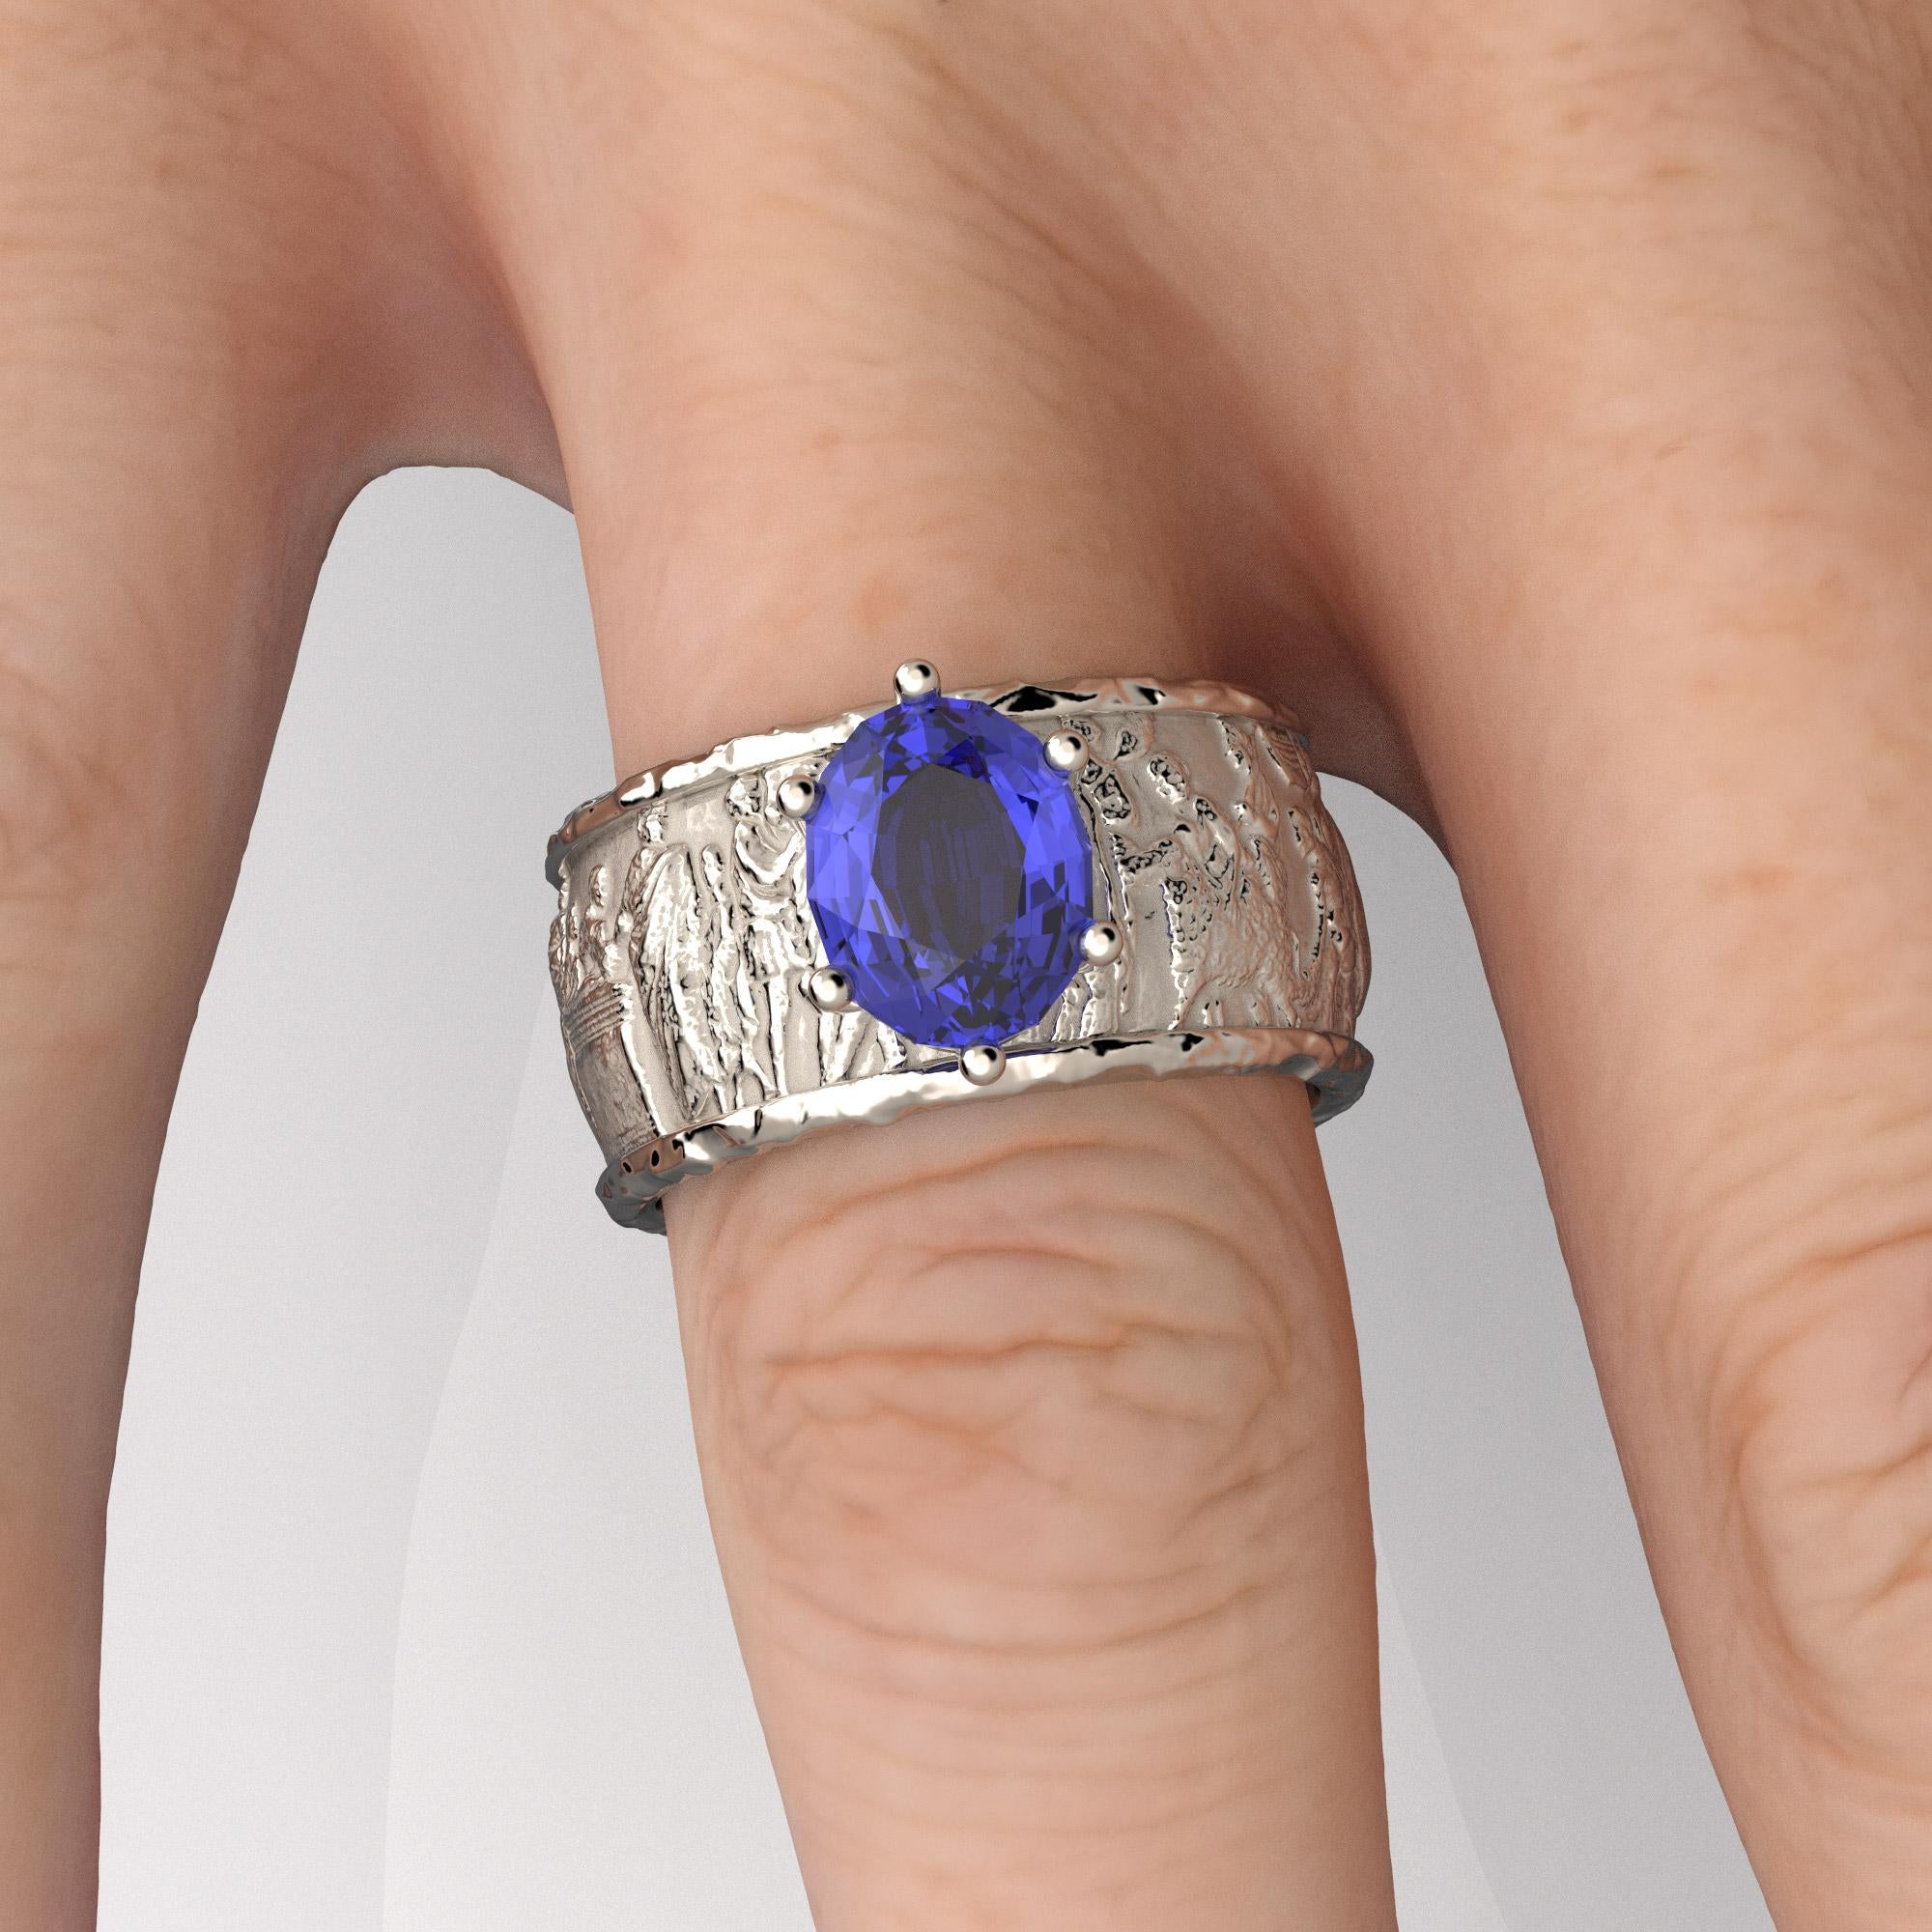 For Sale:  Tanzanite Gold Ring in 14k Solid Gold by Oltremare Gioielli Made in Italy 6